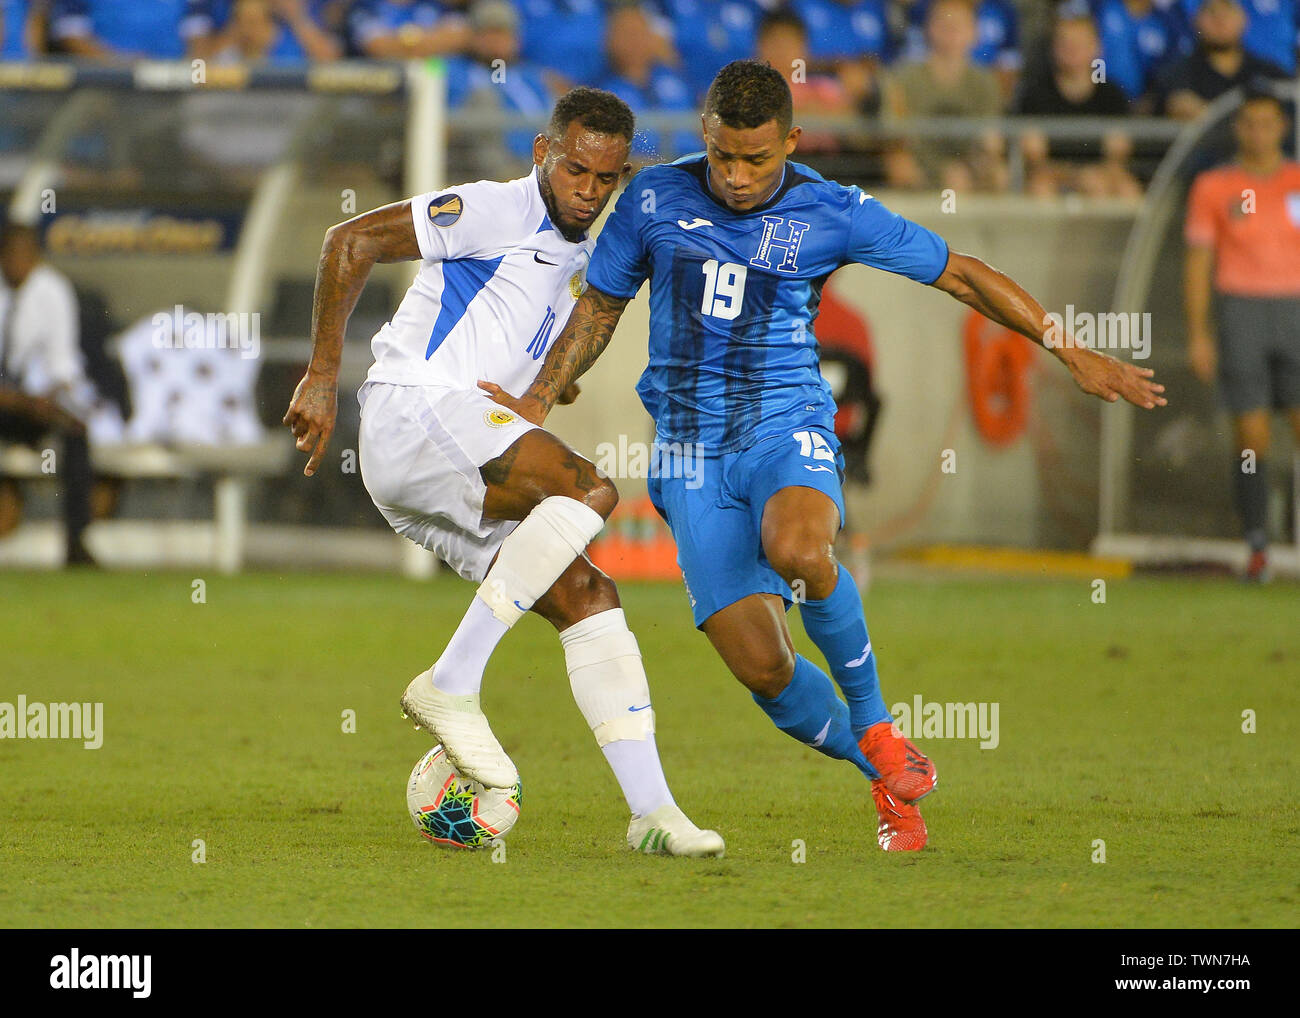 Houston, TX, USA. 21st June, 2019. Honduras midfielder, Luis Garrido (19), and Curacao midfielder, Leandro Bacuna (10), fight for control of the ball during 2019 CONCACAF Gold Cup match between Honduras and Curacao, at BBVA Compass Stadium in Houston, TX. Mandatory Credit: Kevin Langley/Sports South Media/CSM/Alamy Live News Stock Photo